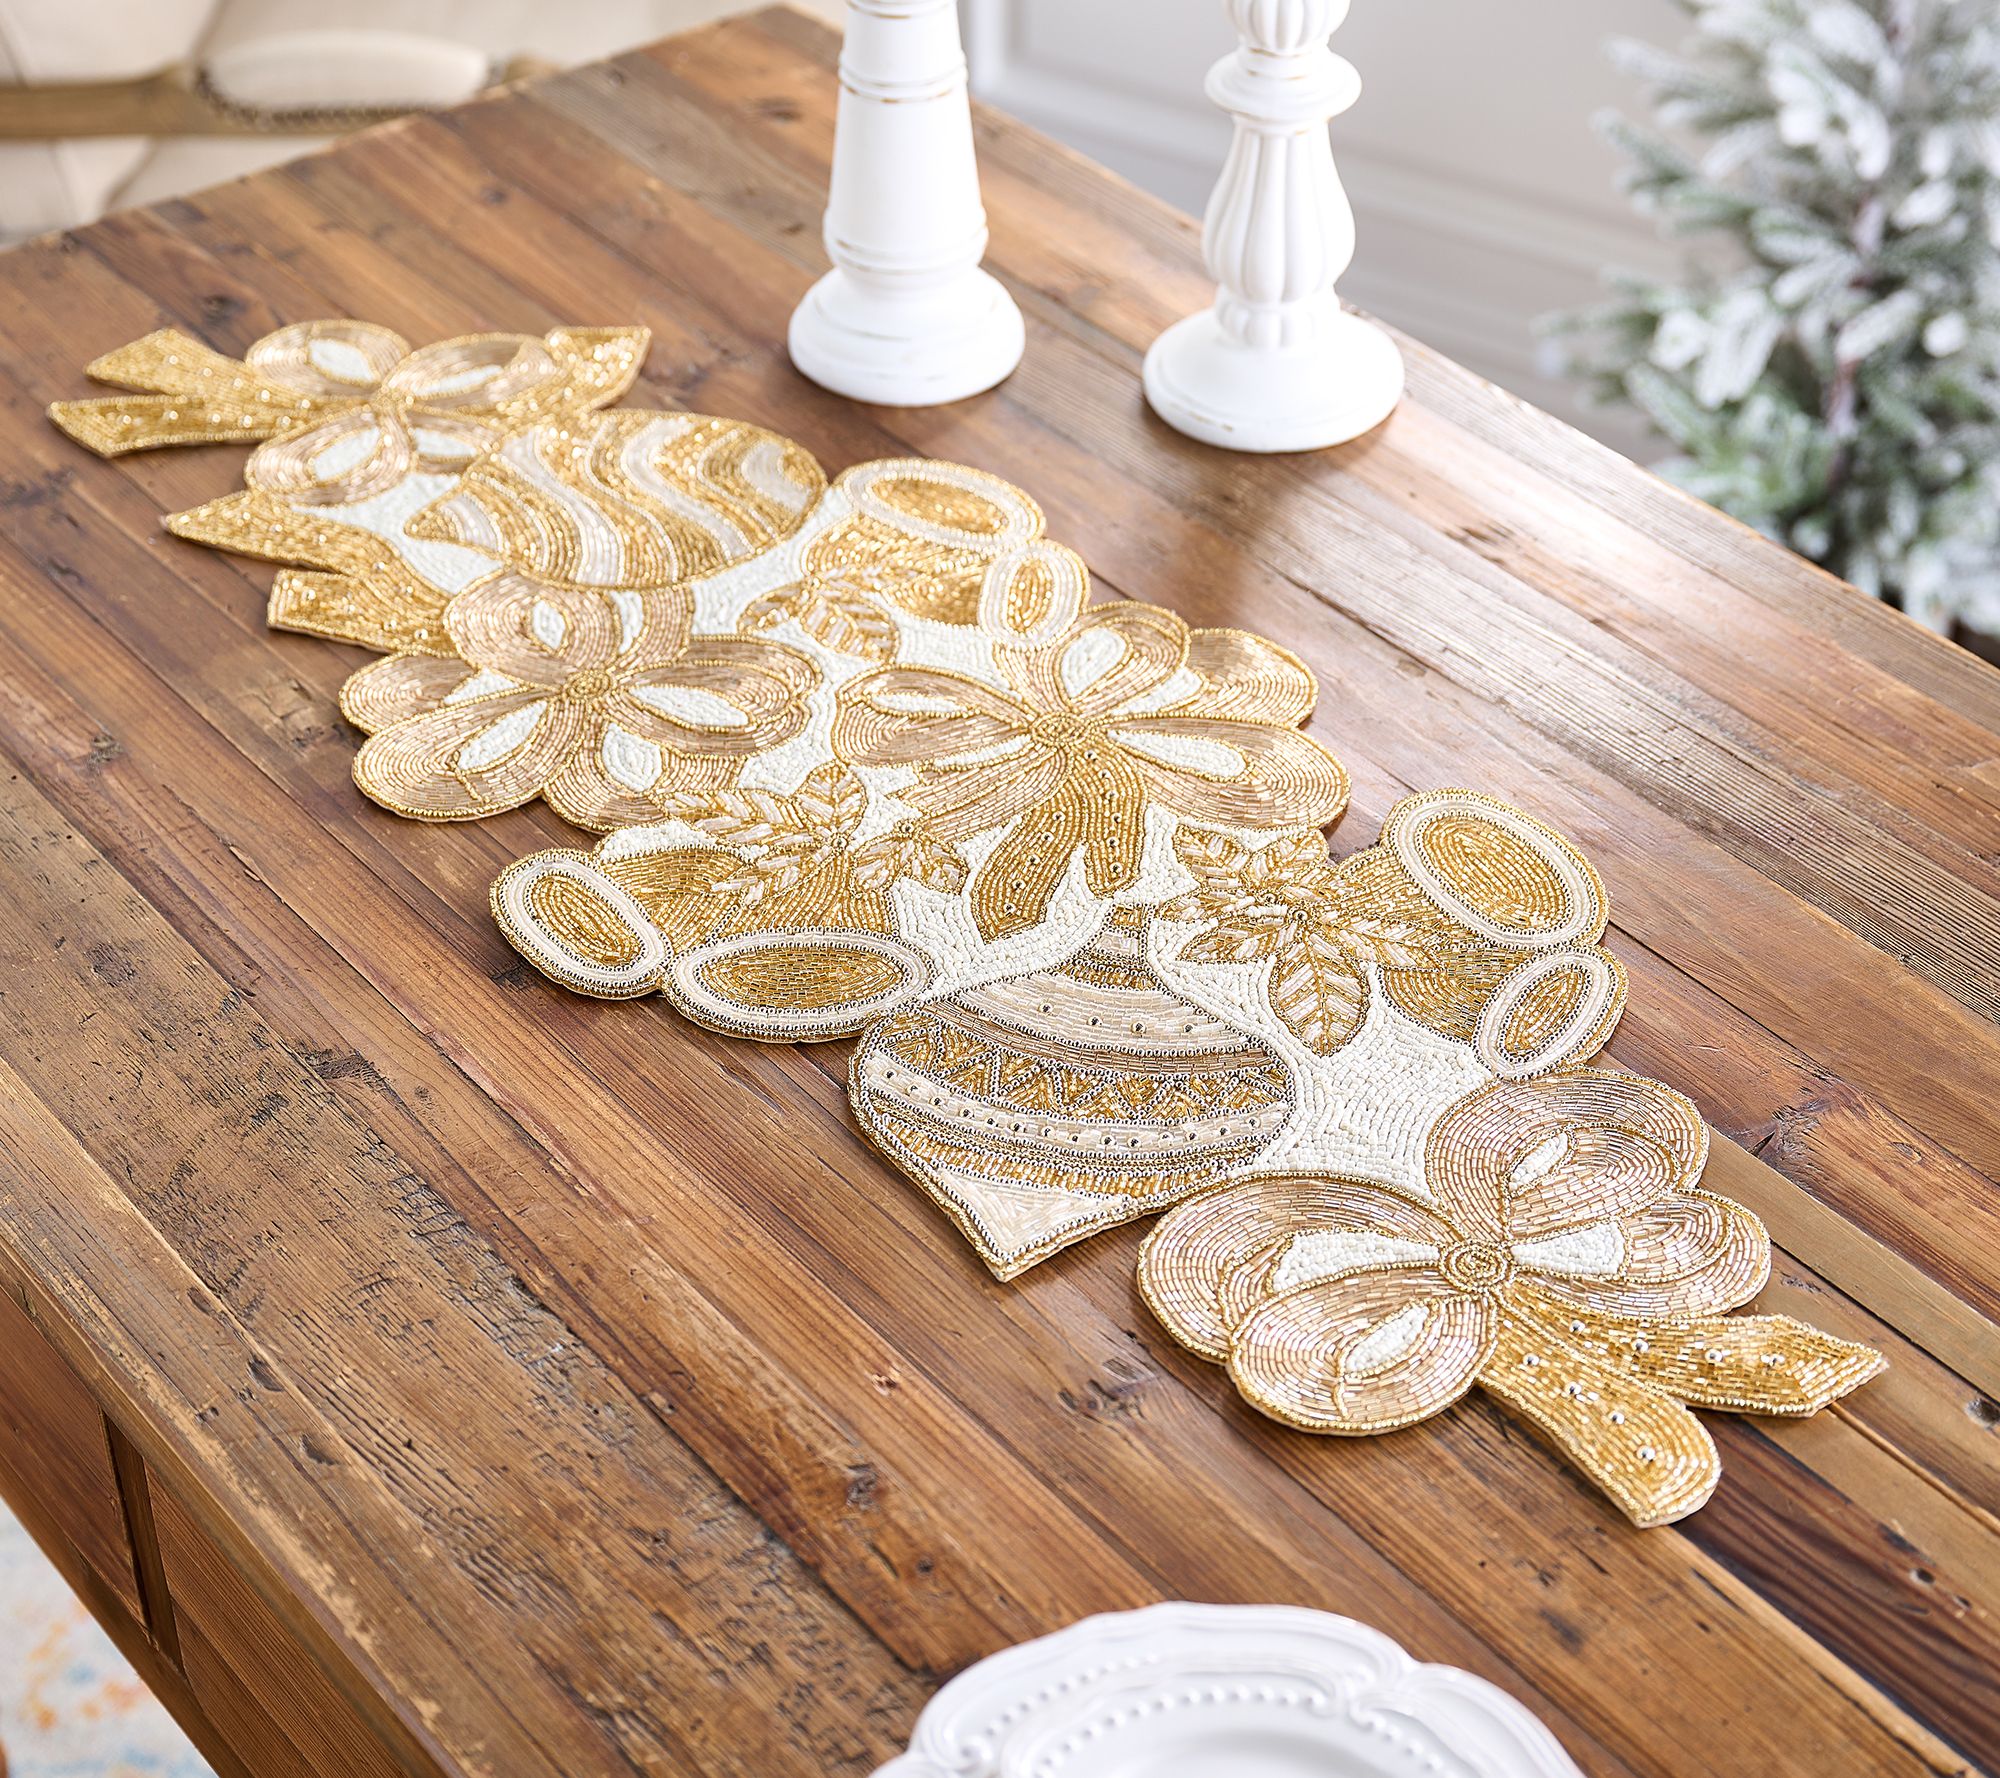 Fabulous collection of Decorative appliques for making table runners